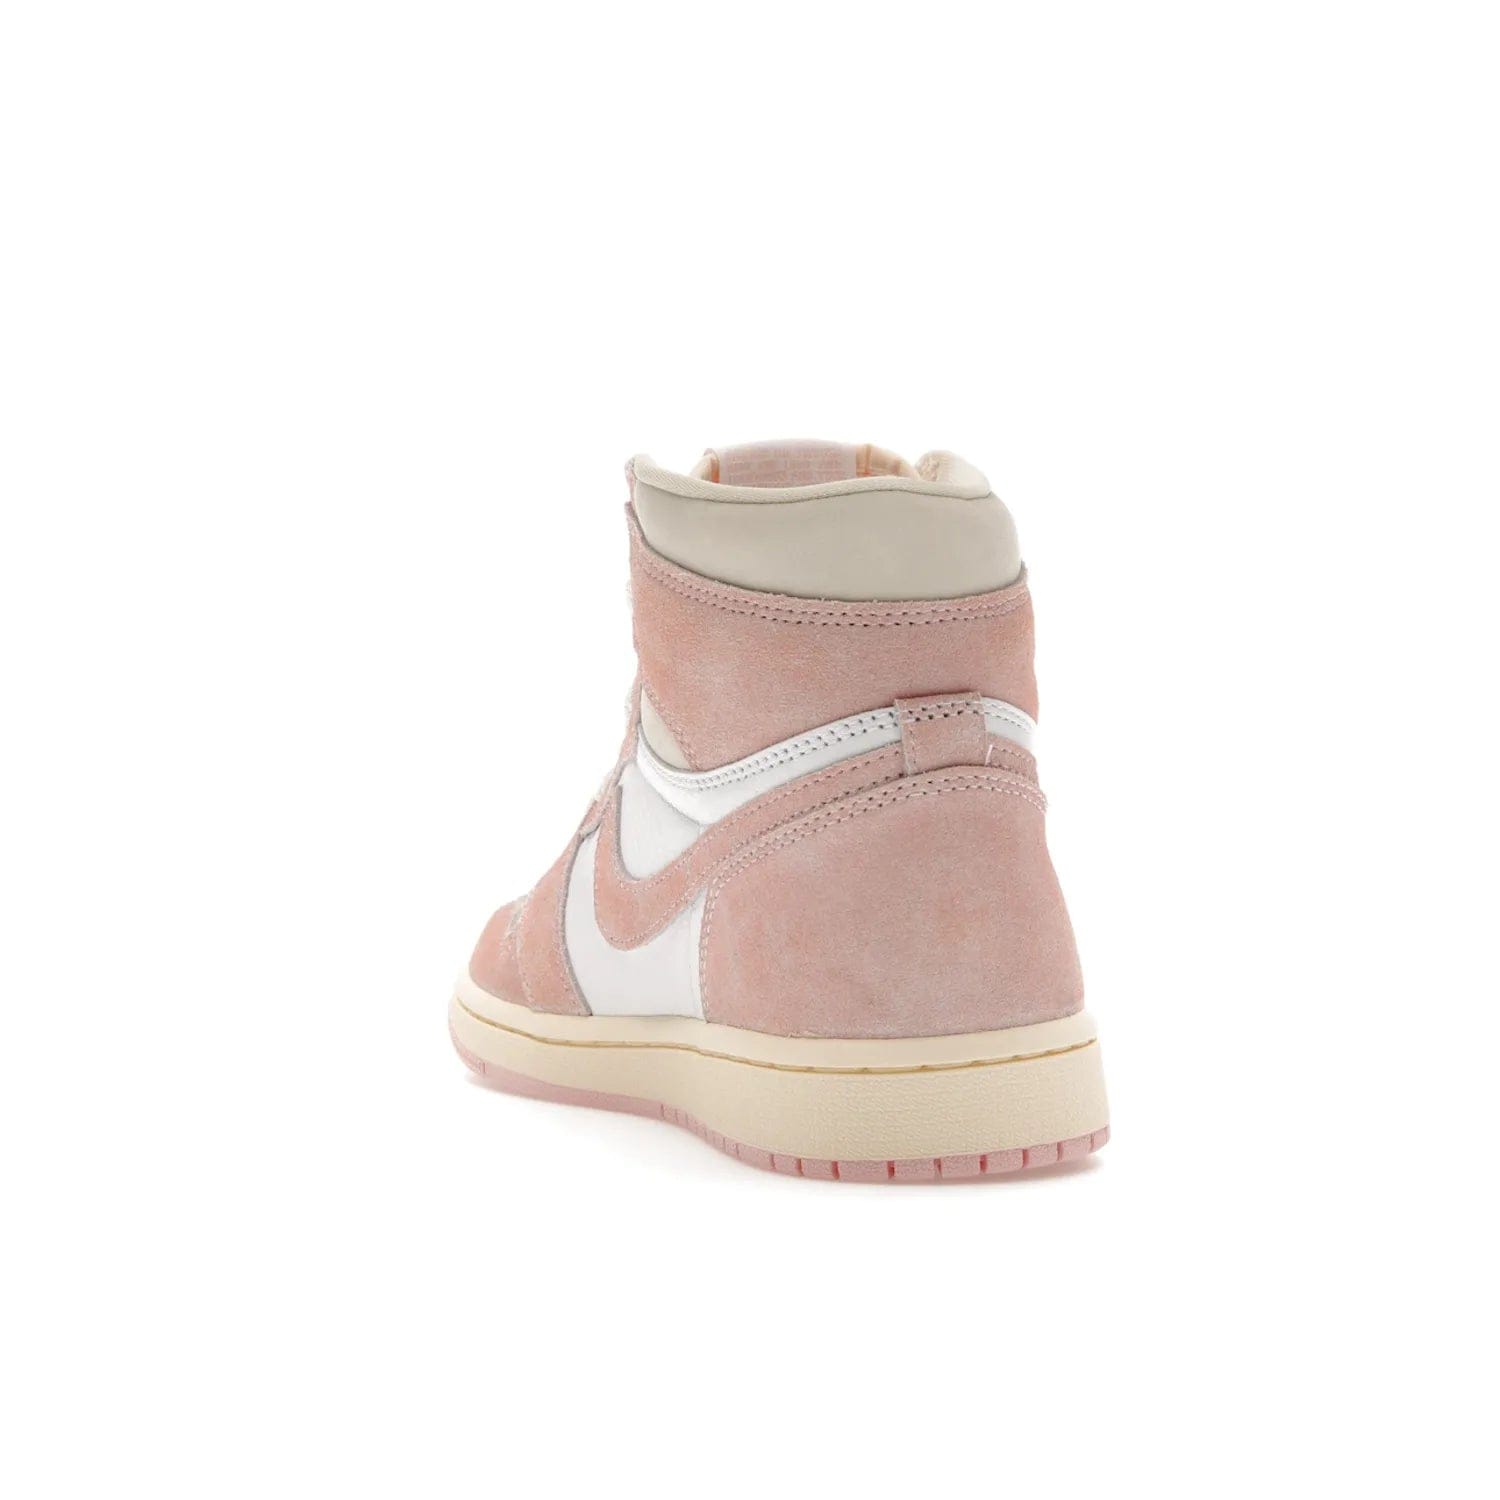 Jordan 1 Retro High OG Washed Pink (Women's) - Image 26 - Only at www.BallersClubKickz.com - Iconic Air Jordan 1 Retro High OG for women with unique pink suede and white leather uppers. Get the timeless look on April 22, 2023.